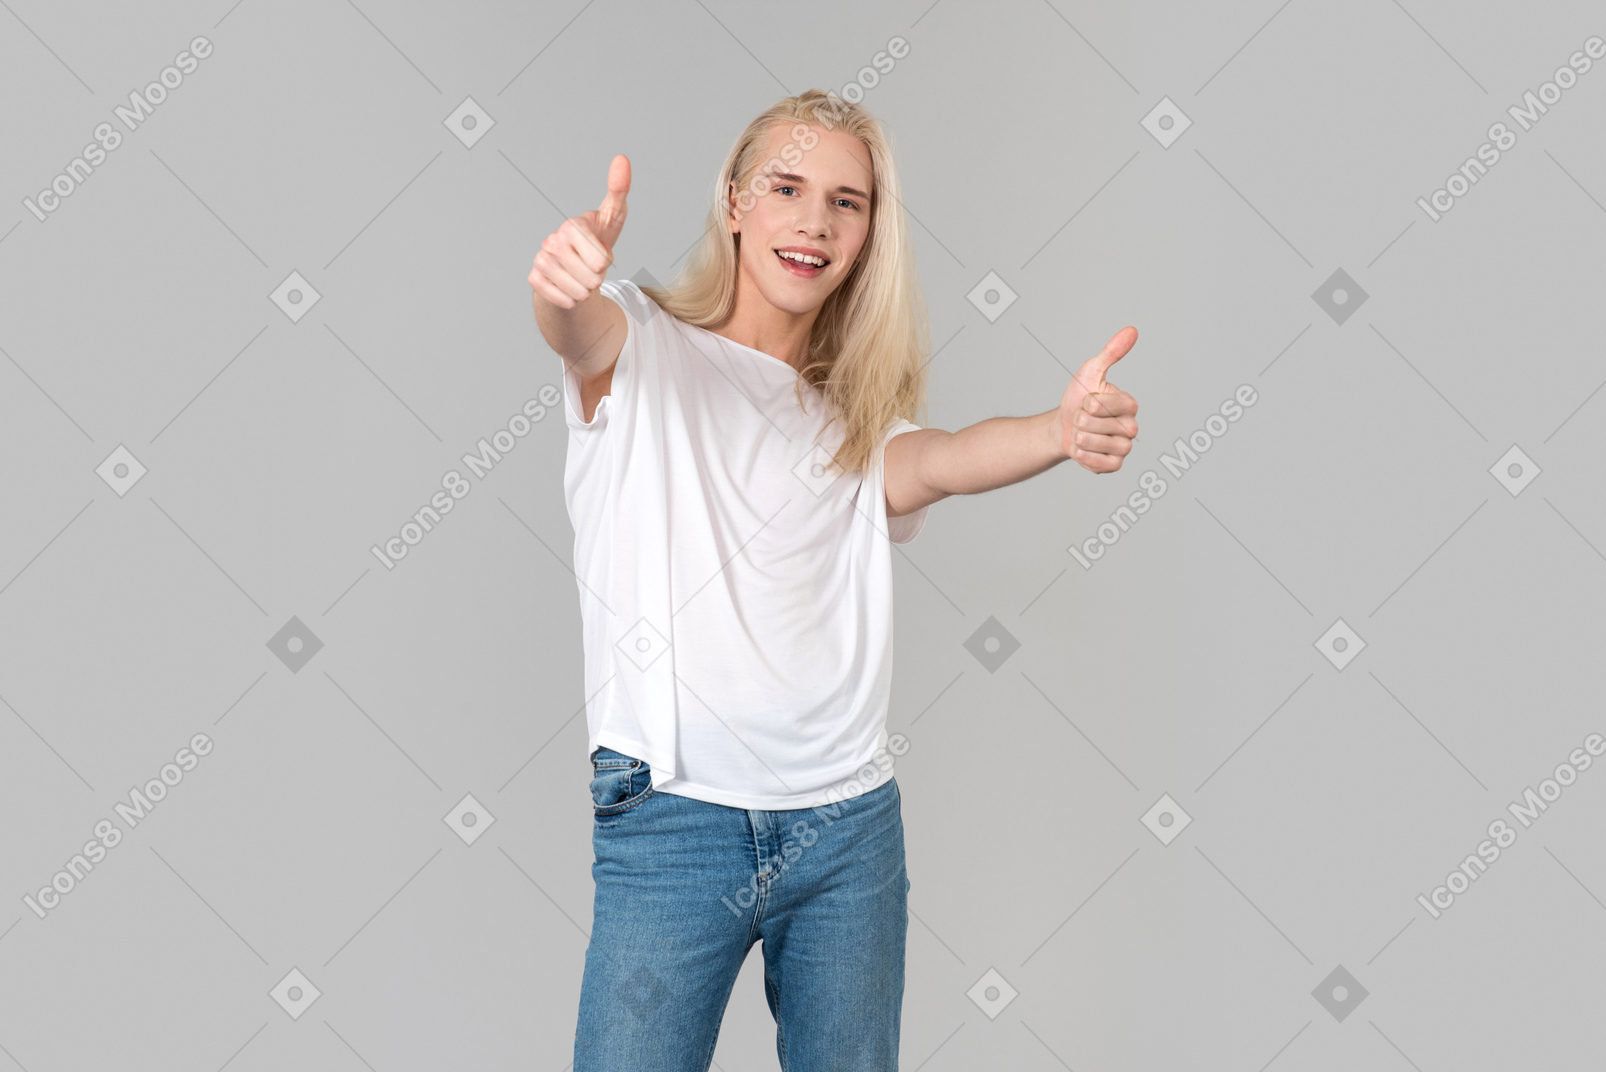 Beautiful young man showing thumbs up